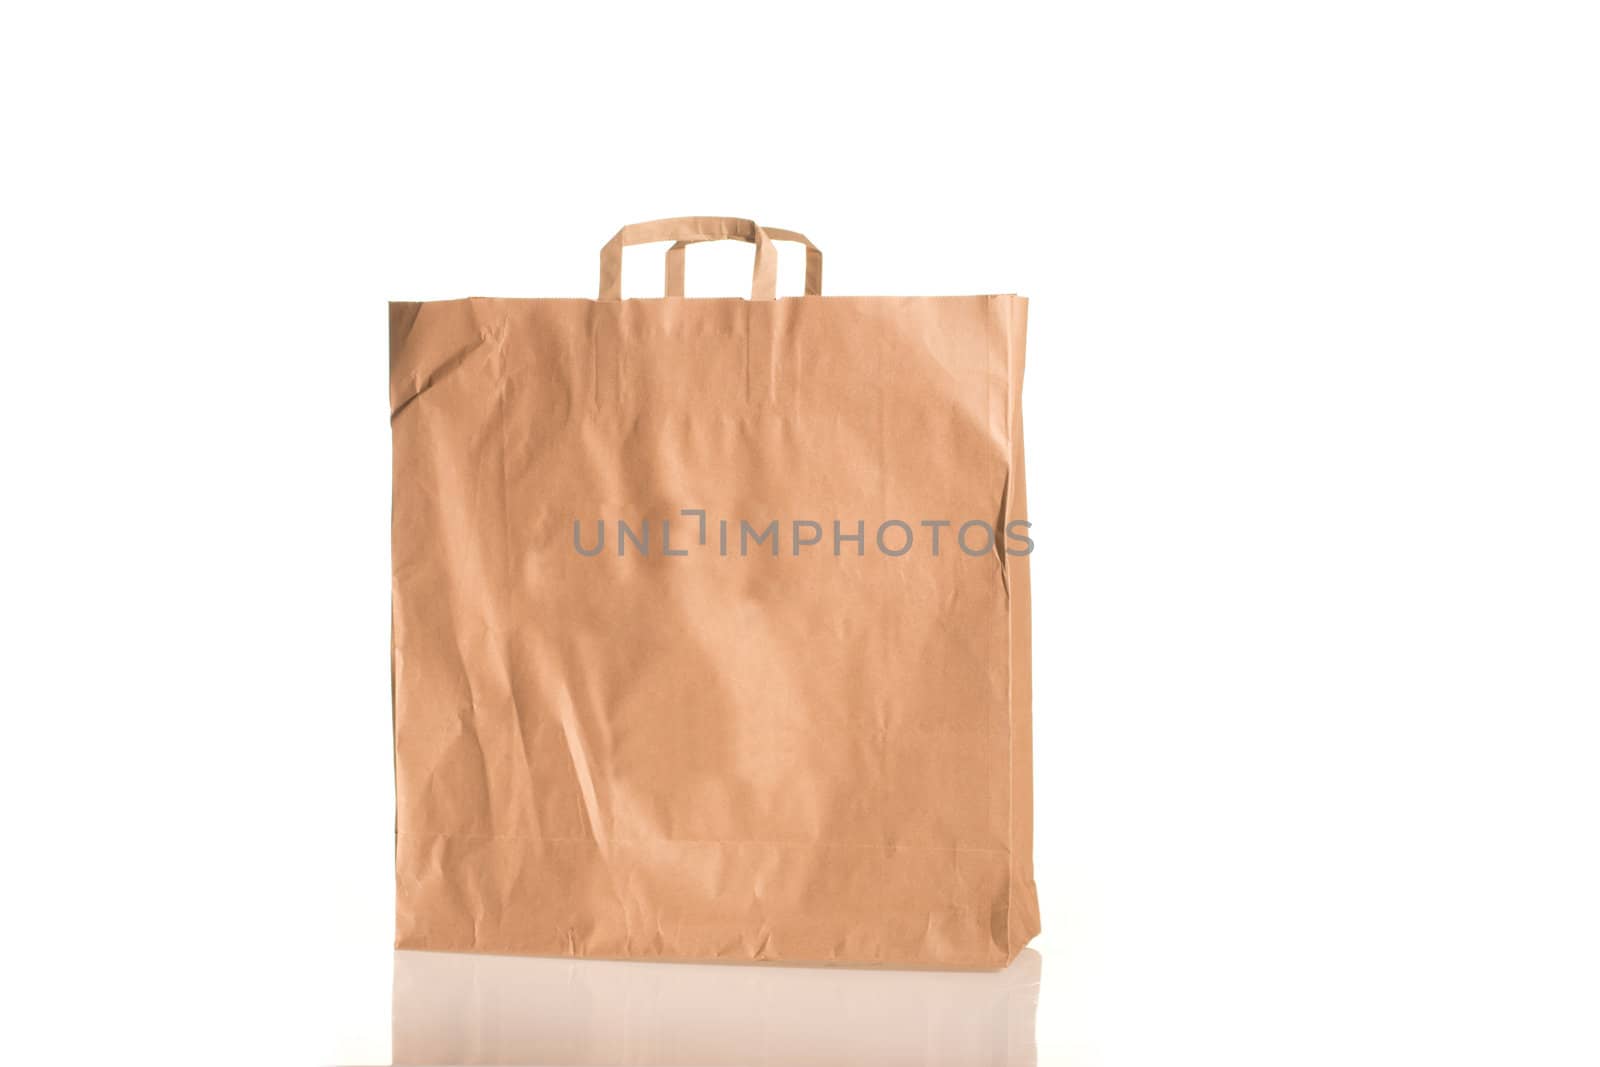 Bpank paper bag isolated on white with glass floor